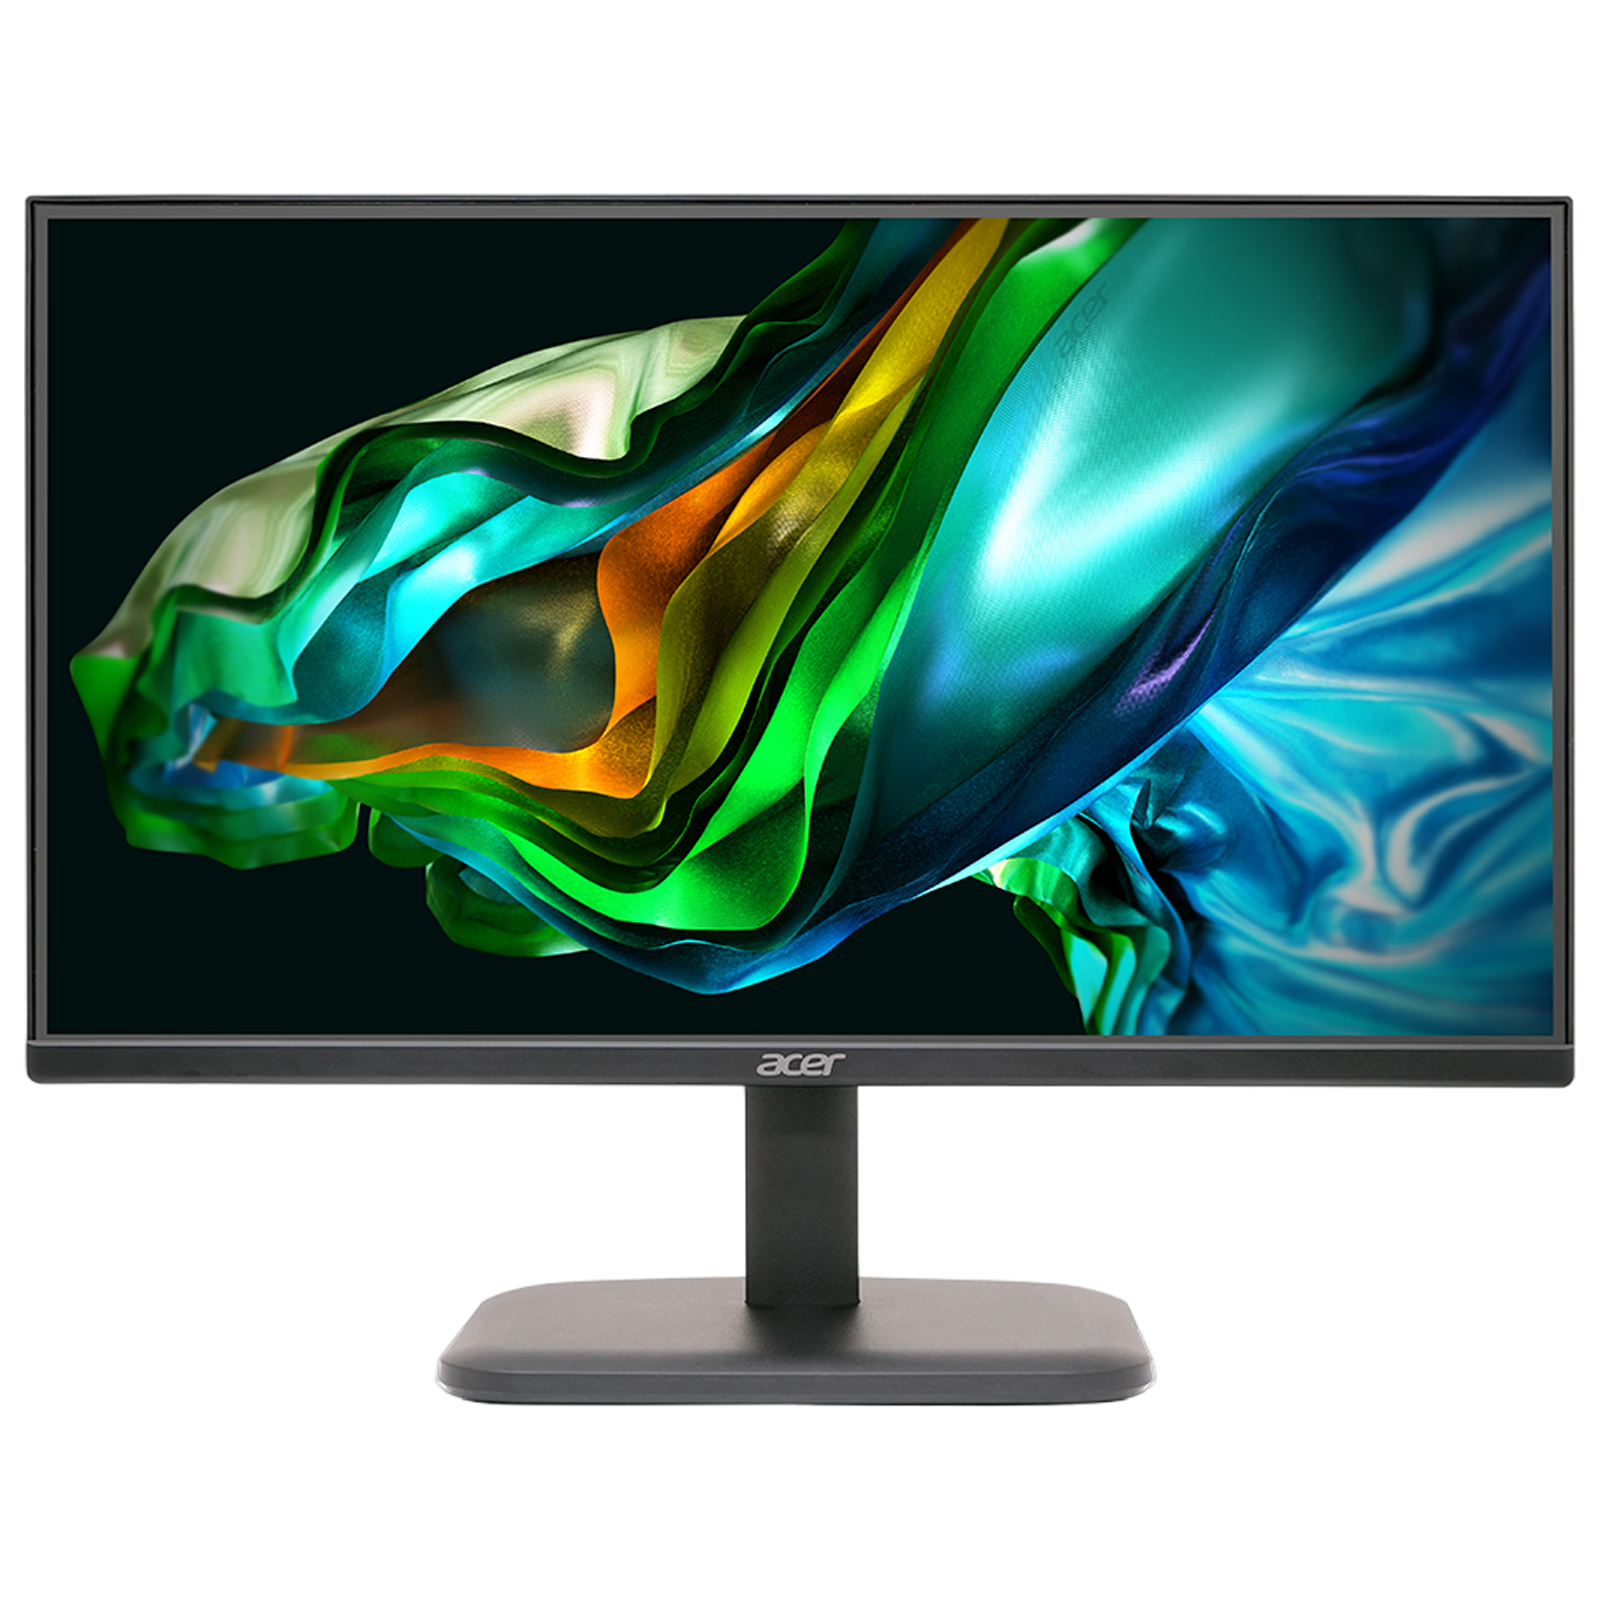 acer EK240Y 60.45 cm (23.8 inch) Full HD IPS Panel LCD Height Adjustable Monitor with LED Backlight